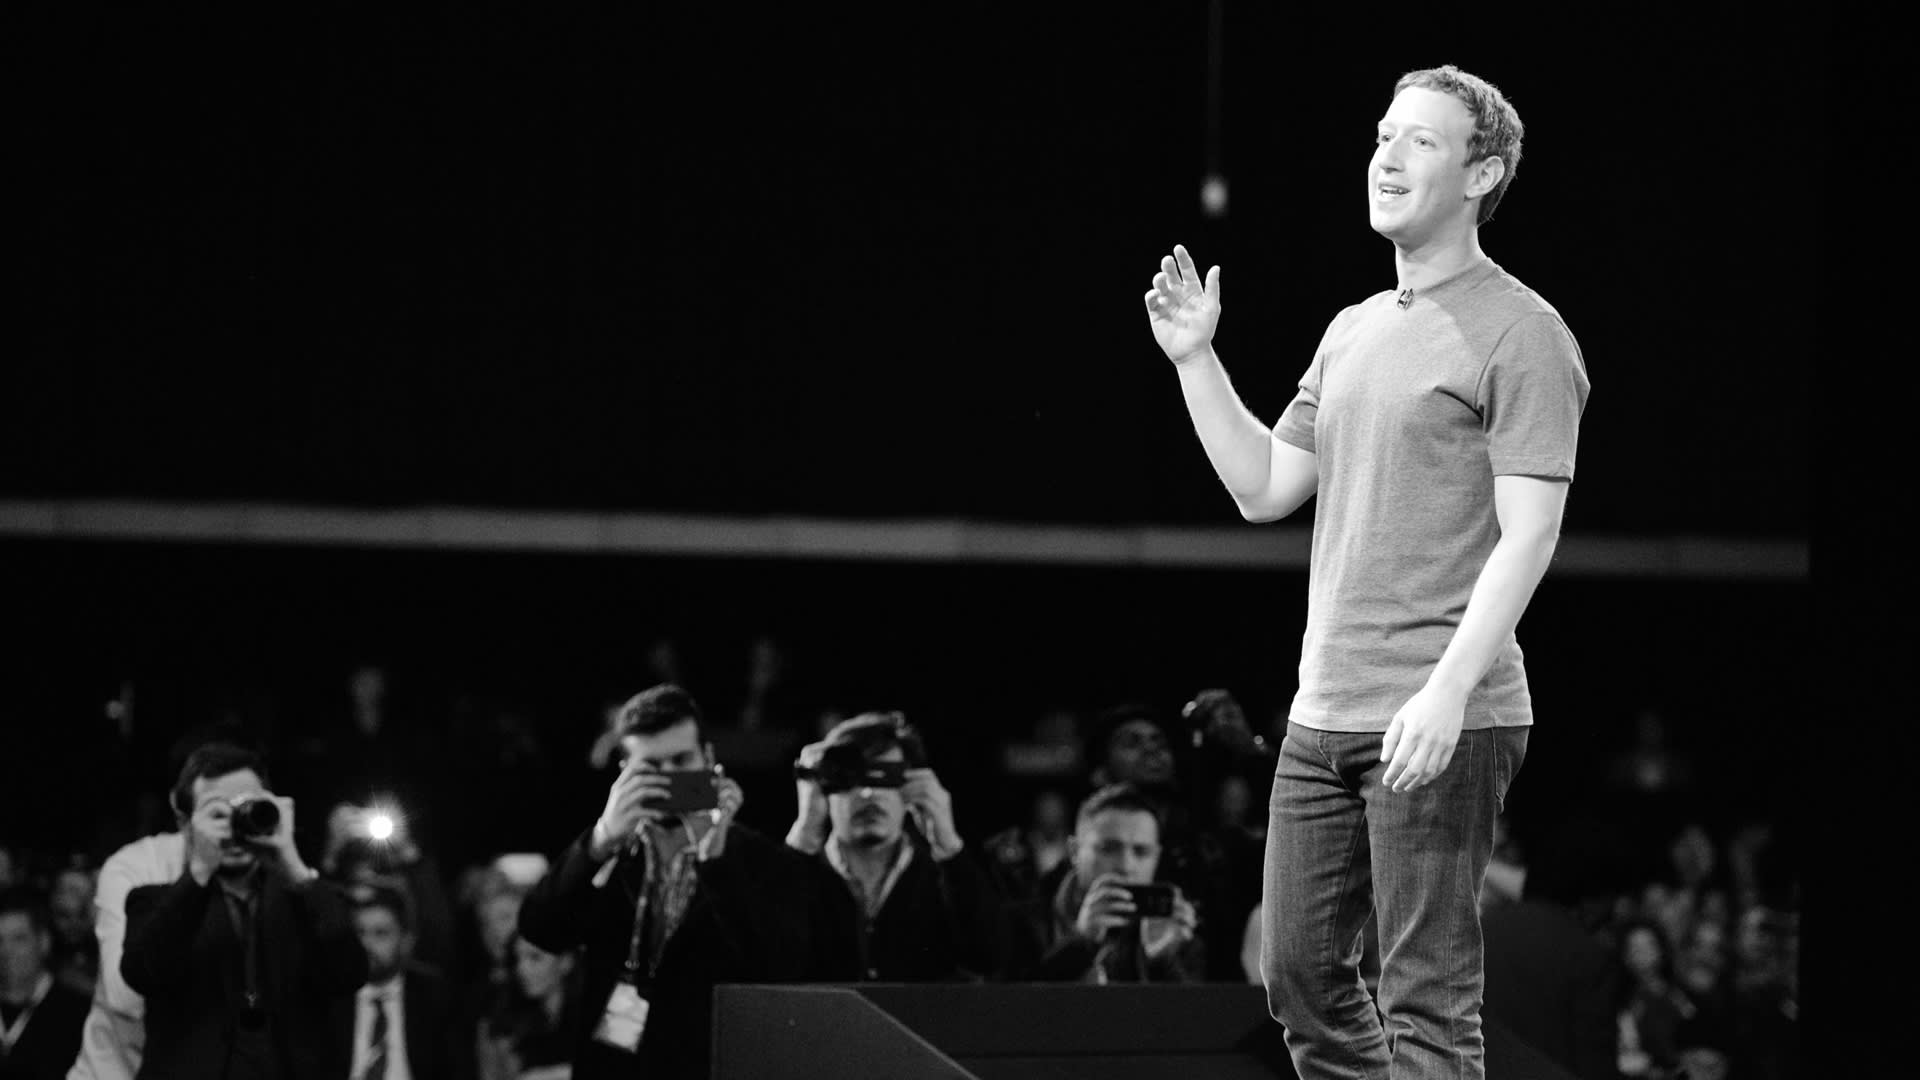 Can Zuckerberg Rebuild Trust? It’s A Long Shot, But Here’s Where To Start